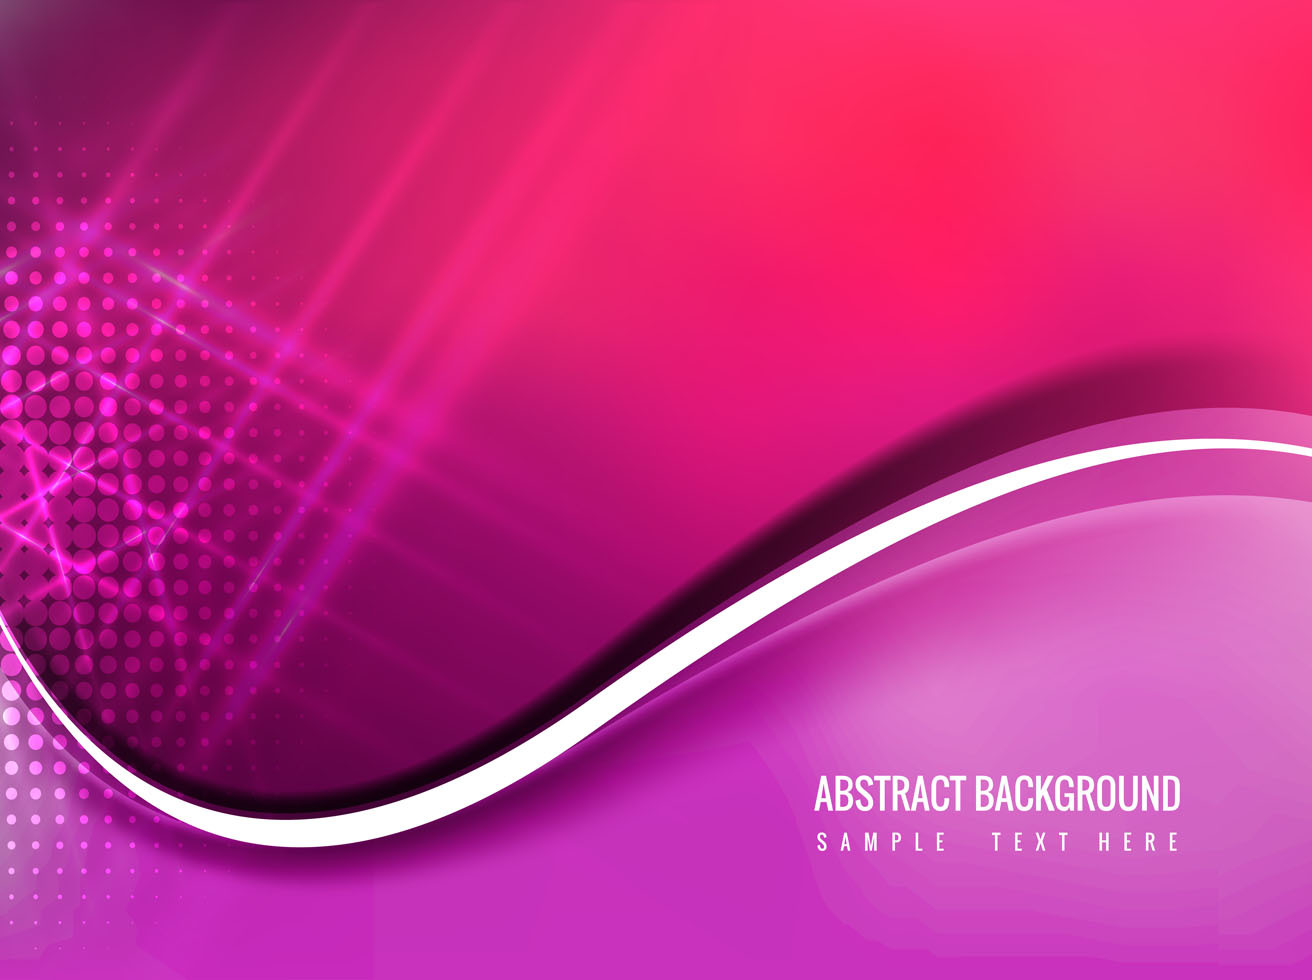 Free Vector Pink Color Abstract Background Vector Art & Graphics | freevector.com